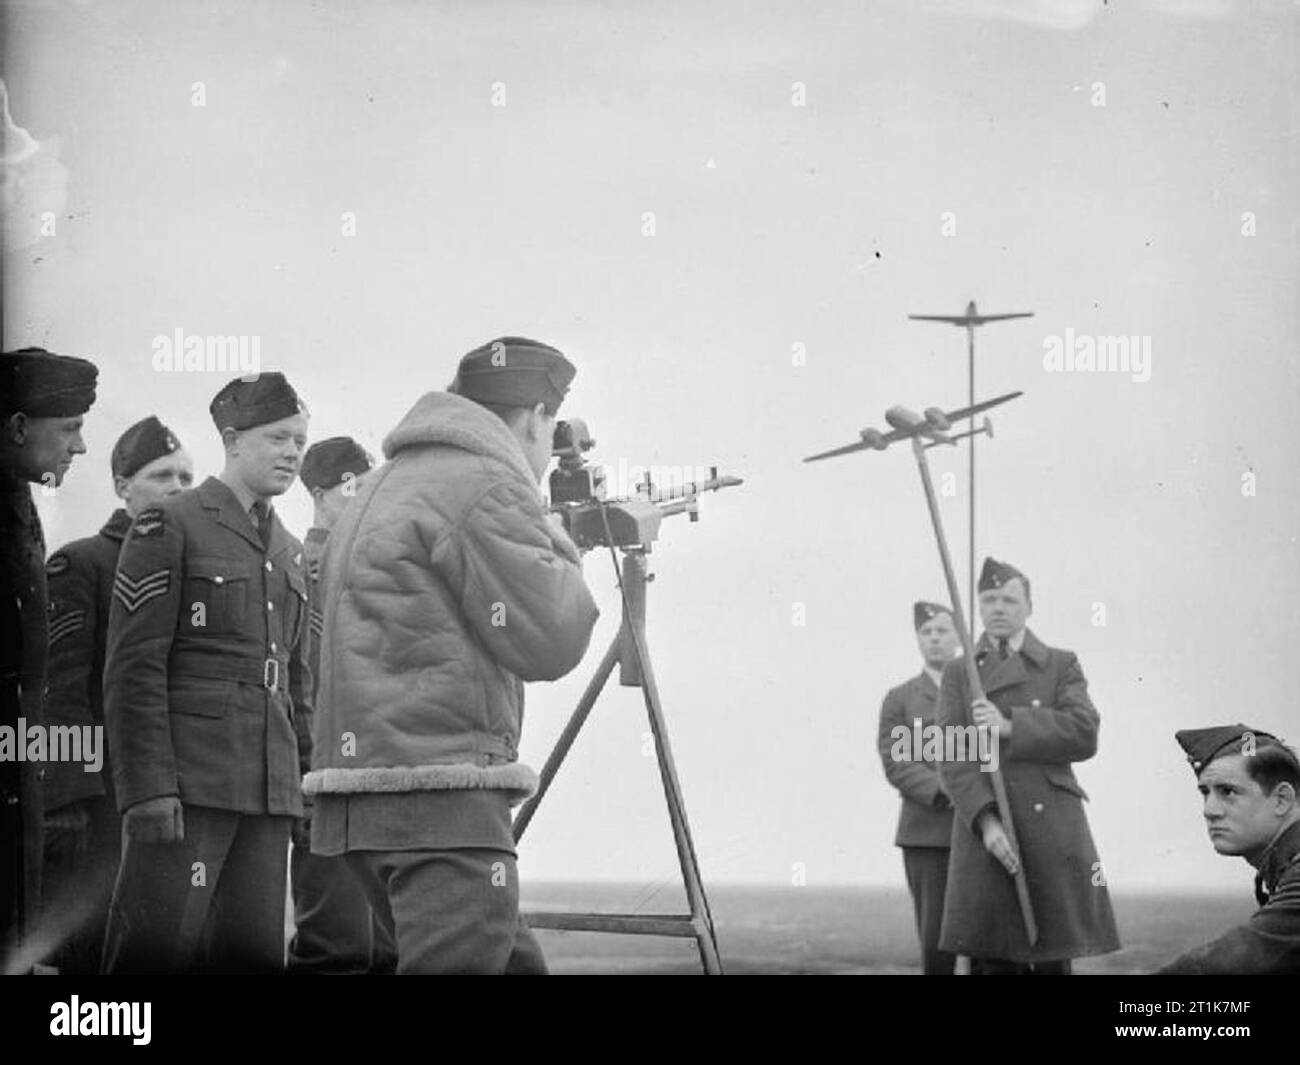 Royal Air Force Army C-operation Command, 1940-1943. Air gunners of No. 400 Squadron RCAF being trained in aircraft recognition and judging the distances of enemy aircraft by means of scale models, at Odiham, Hampshire. Stock Photo